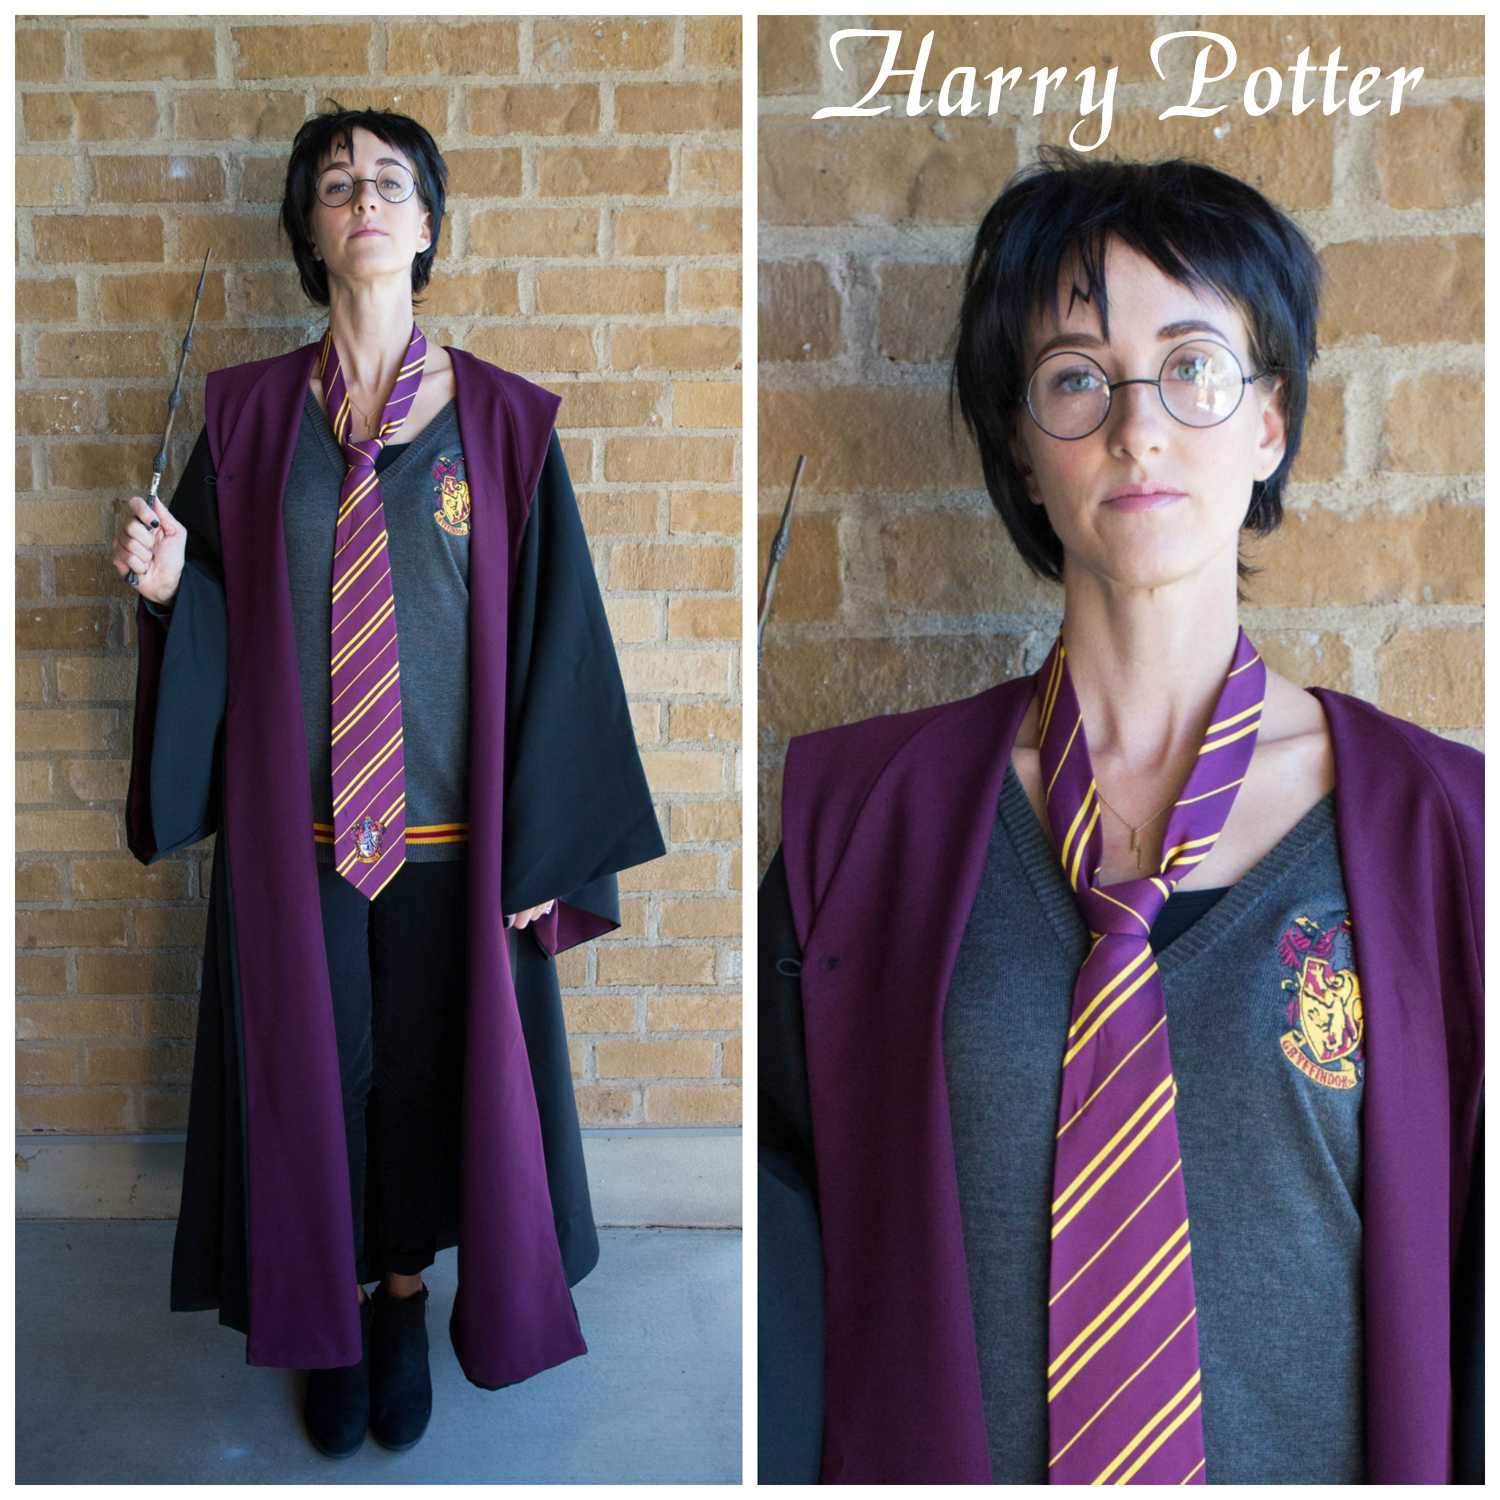 Collection 93+ Pictures Harry Potter Characters To Dress Up As Stunning